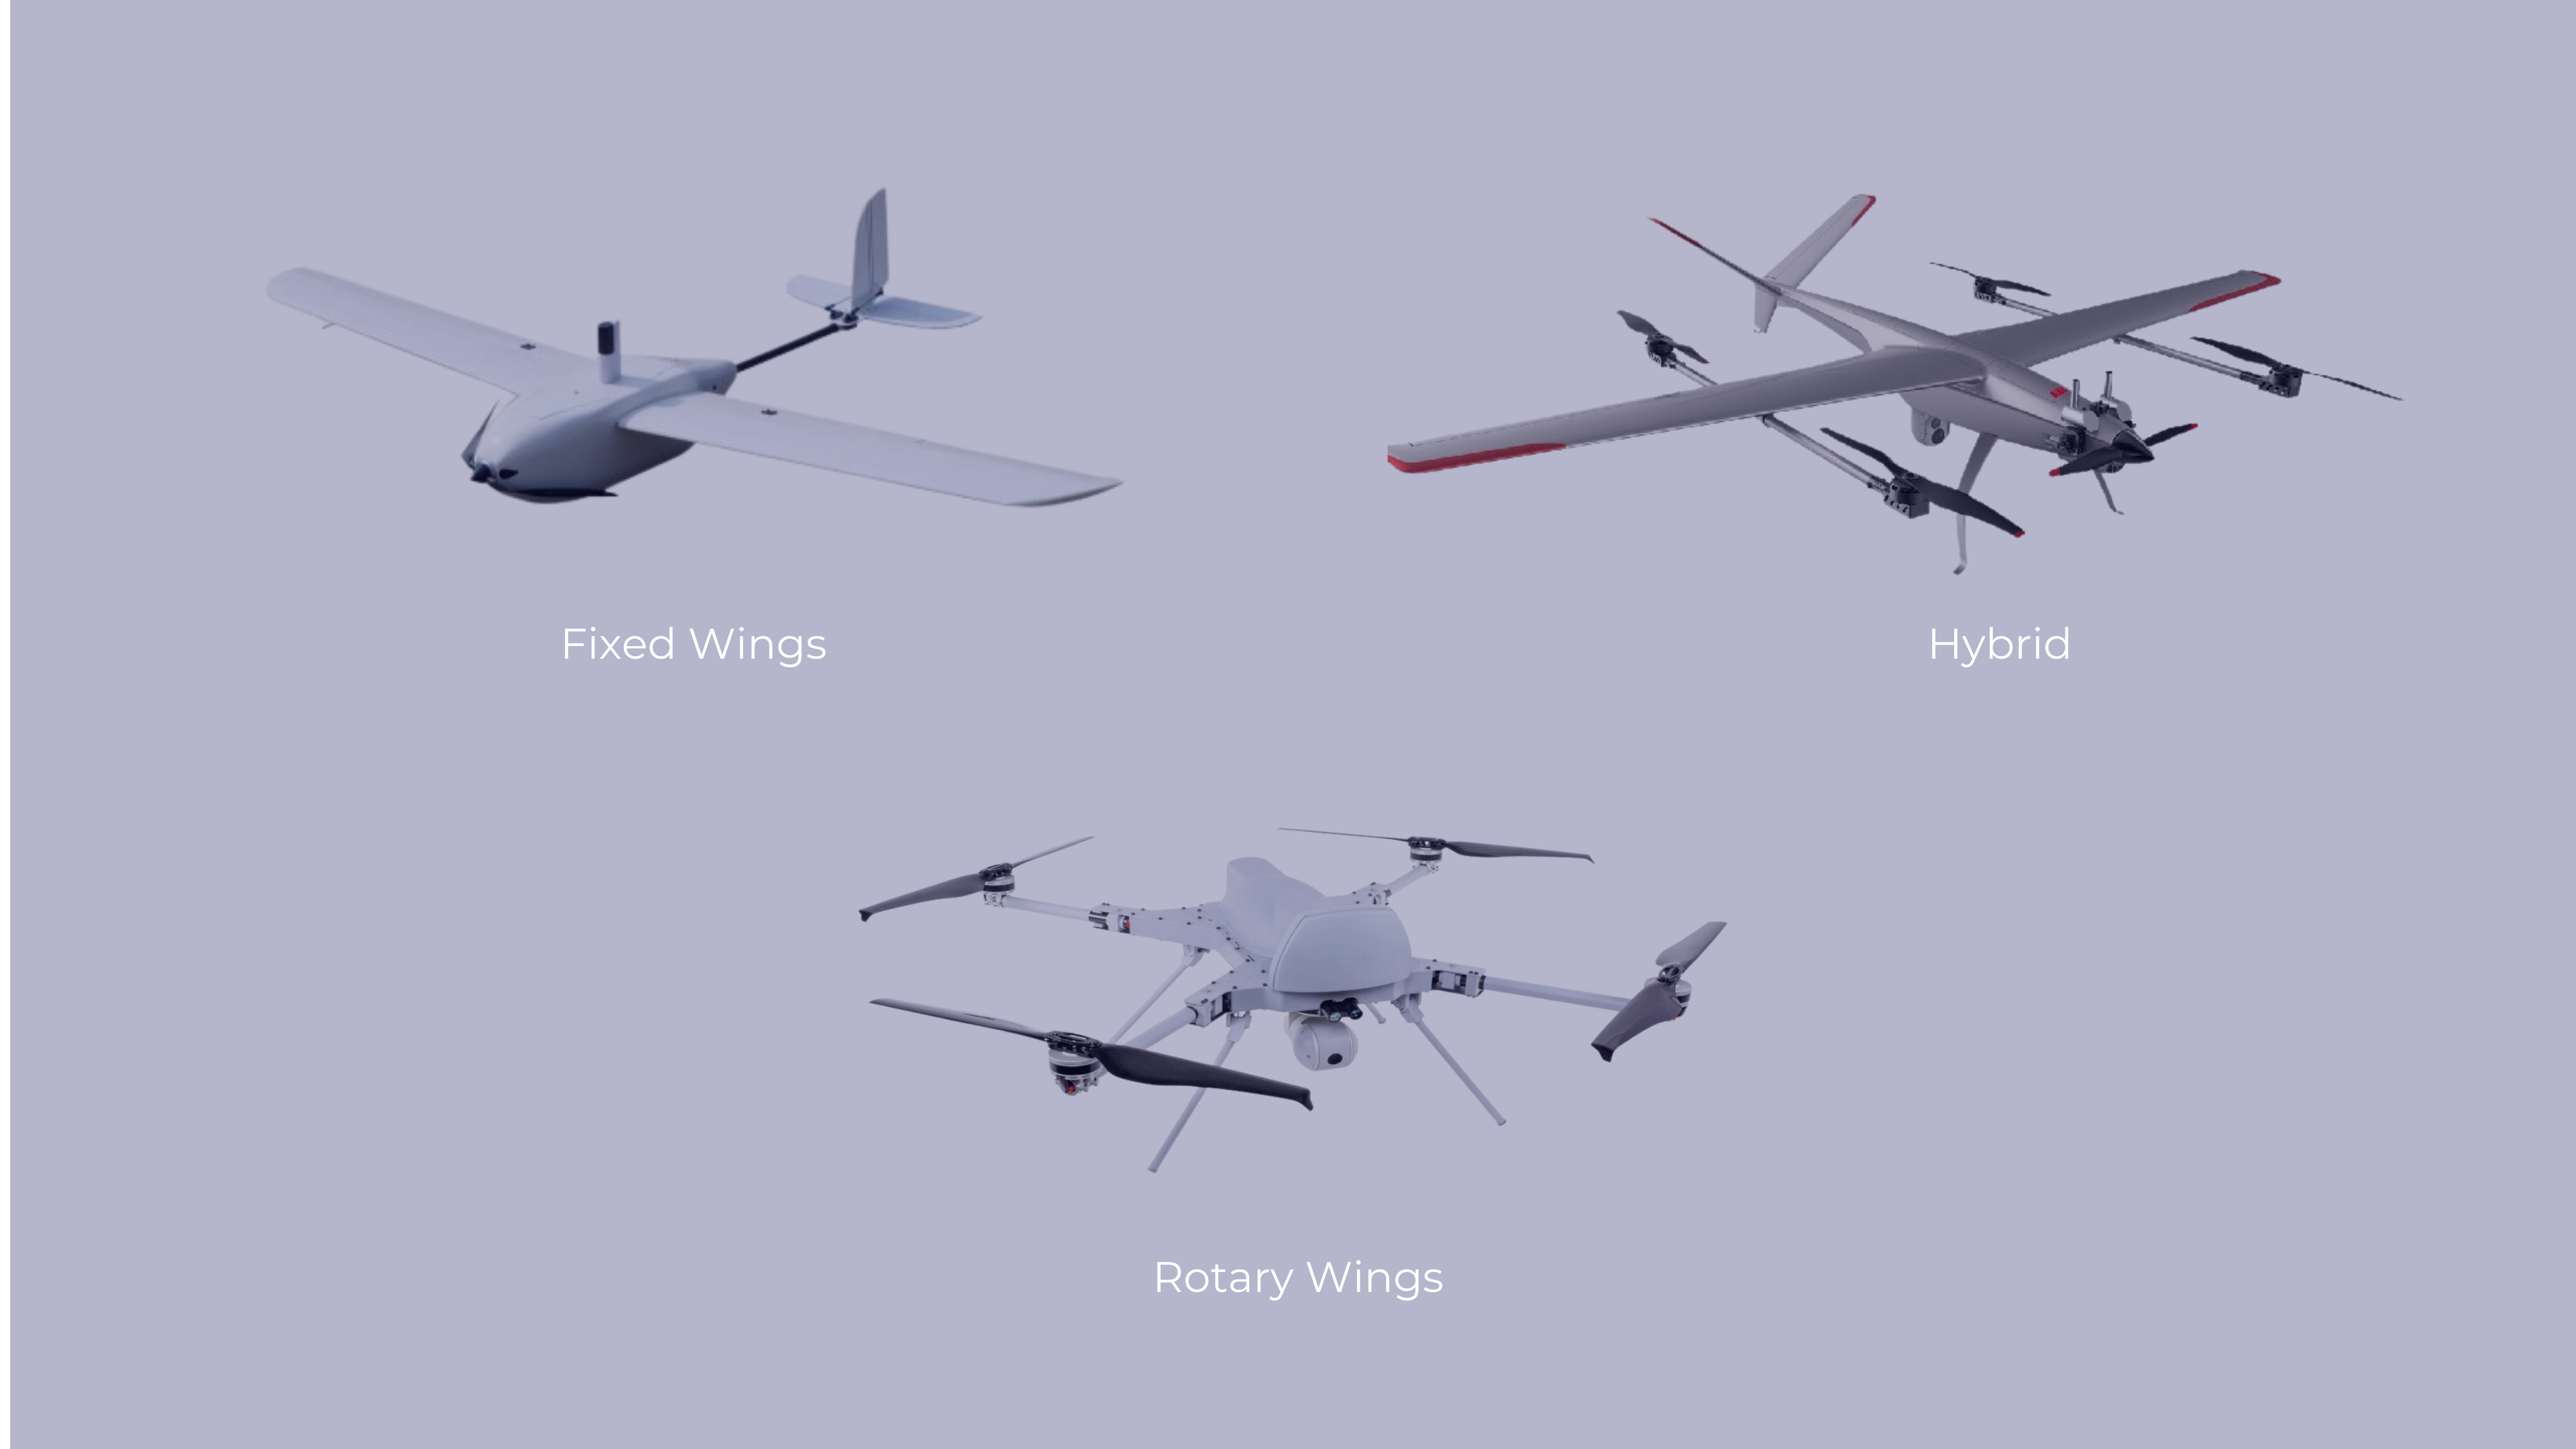 Picture comparison between fixed wings, rotary wings, and hybrid drone in one image